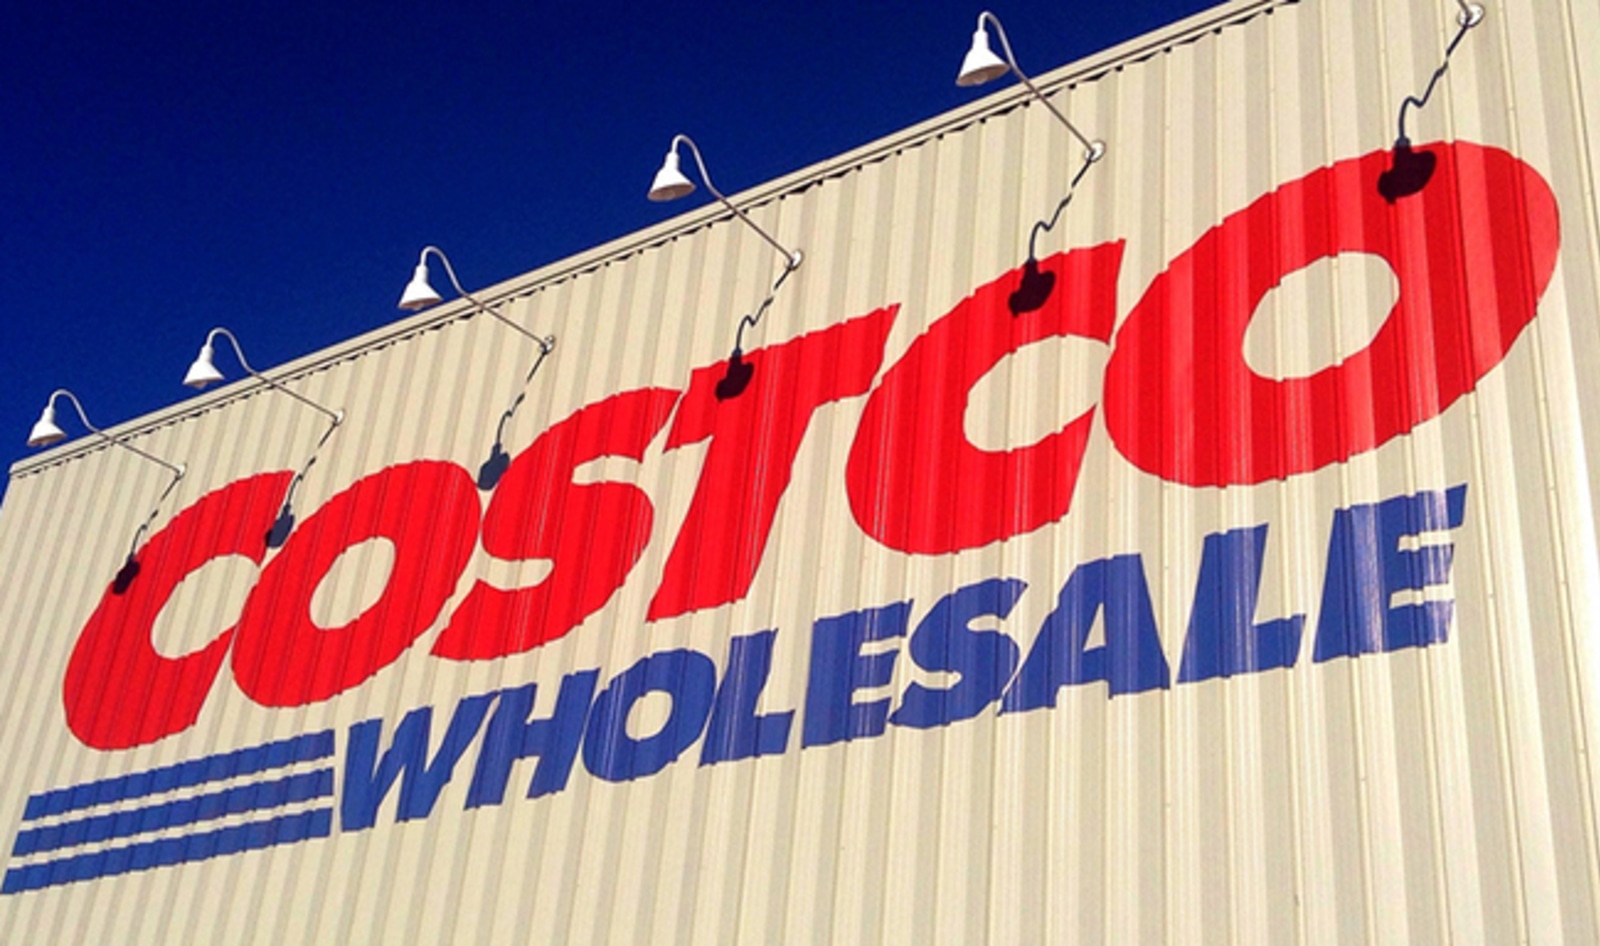 Costco Ditches Hot Dogs to Make Room for Vegan Options